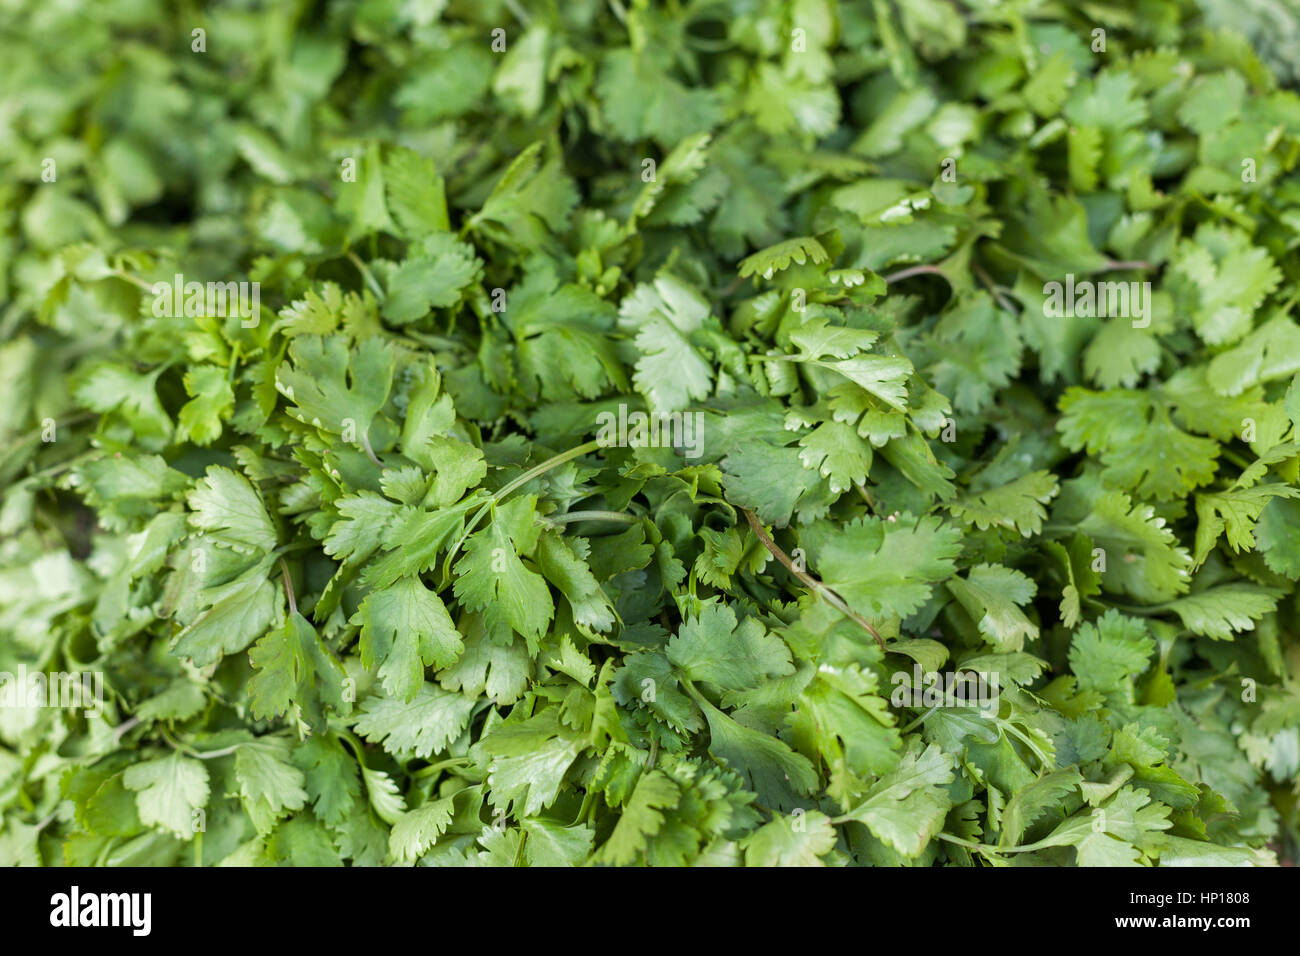 Green cilantro leaves close up at a market Stock Photo